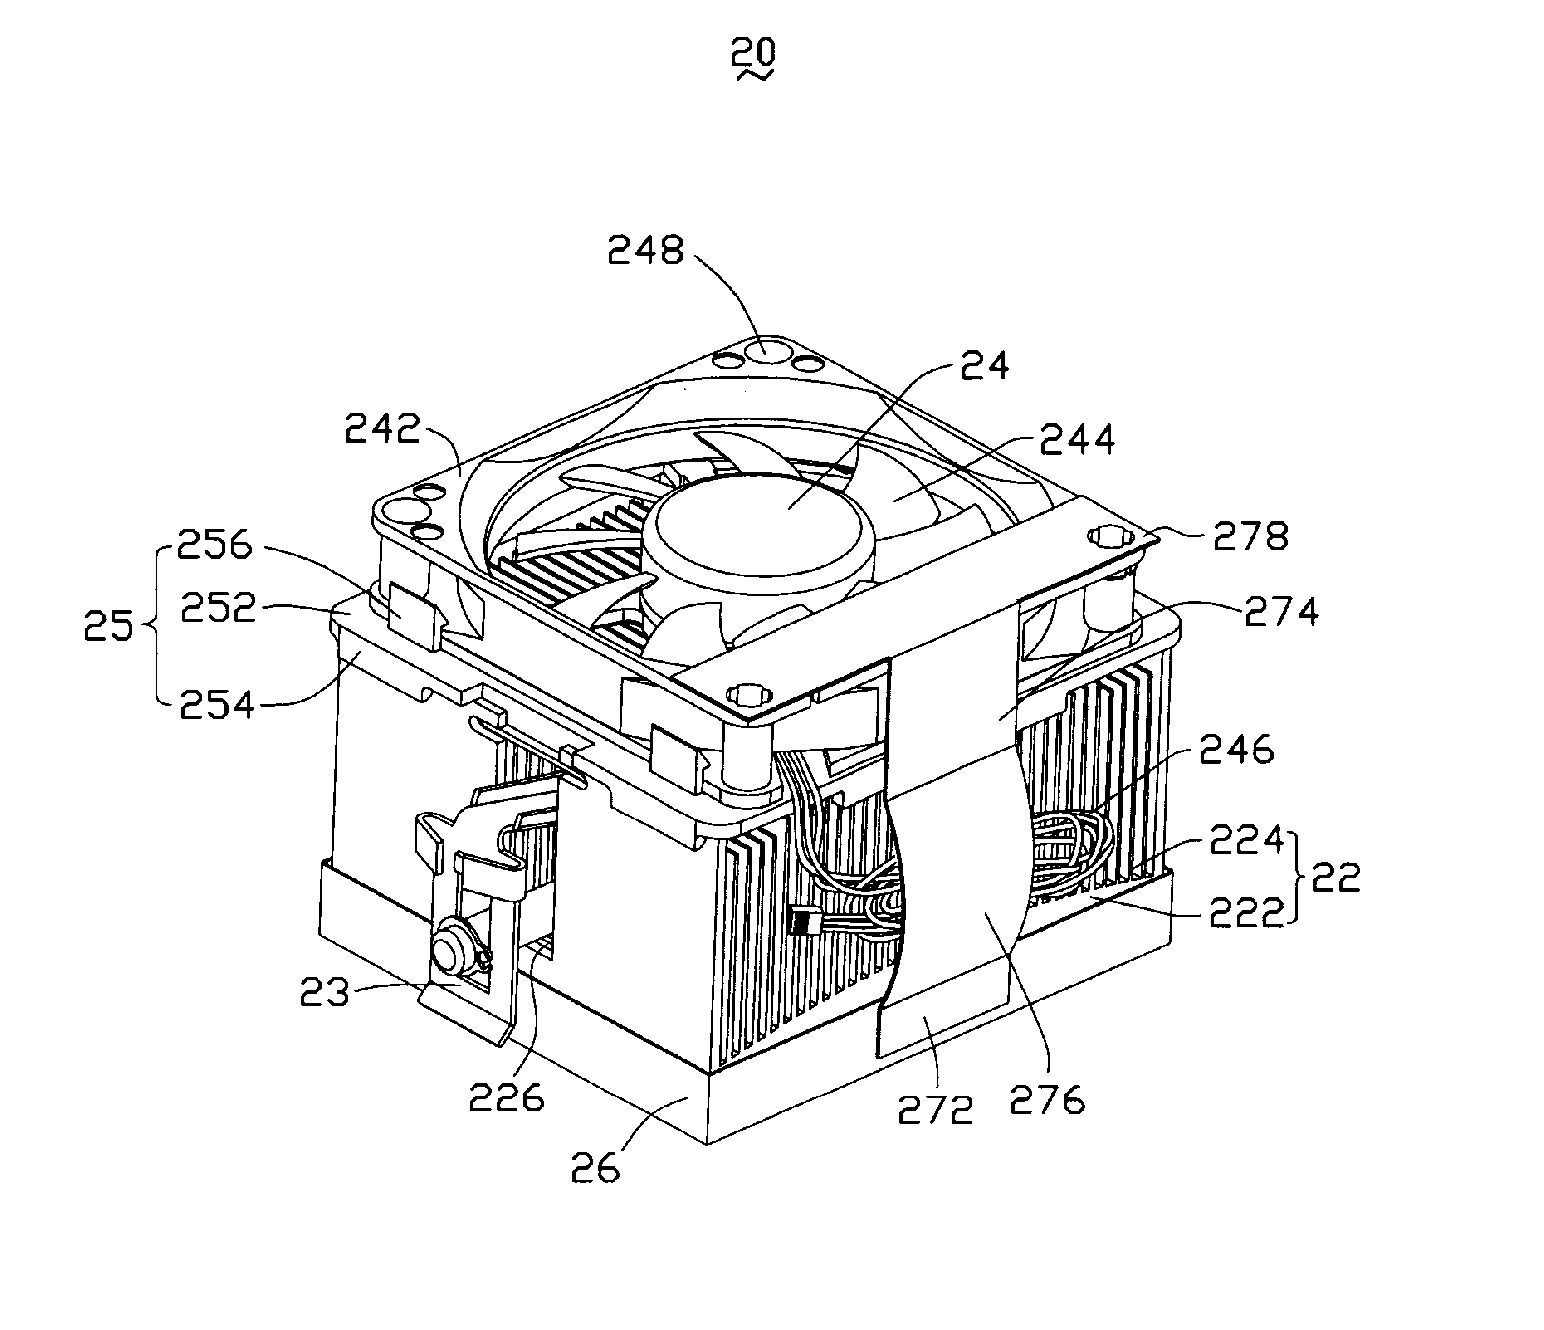 Heat dissipation device having power wires fixture